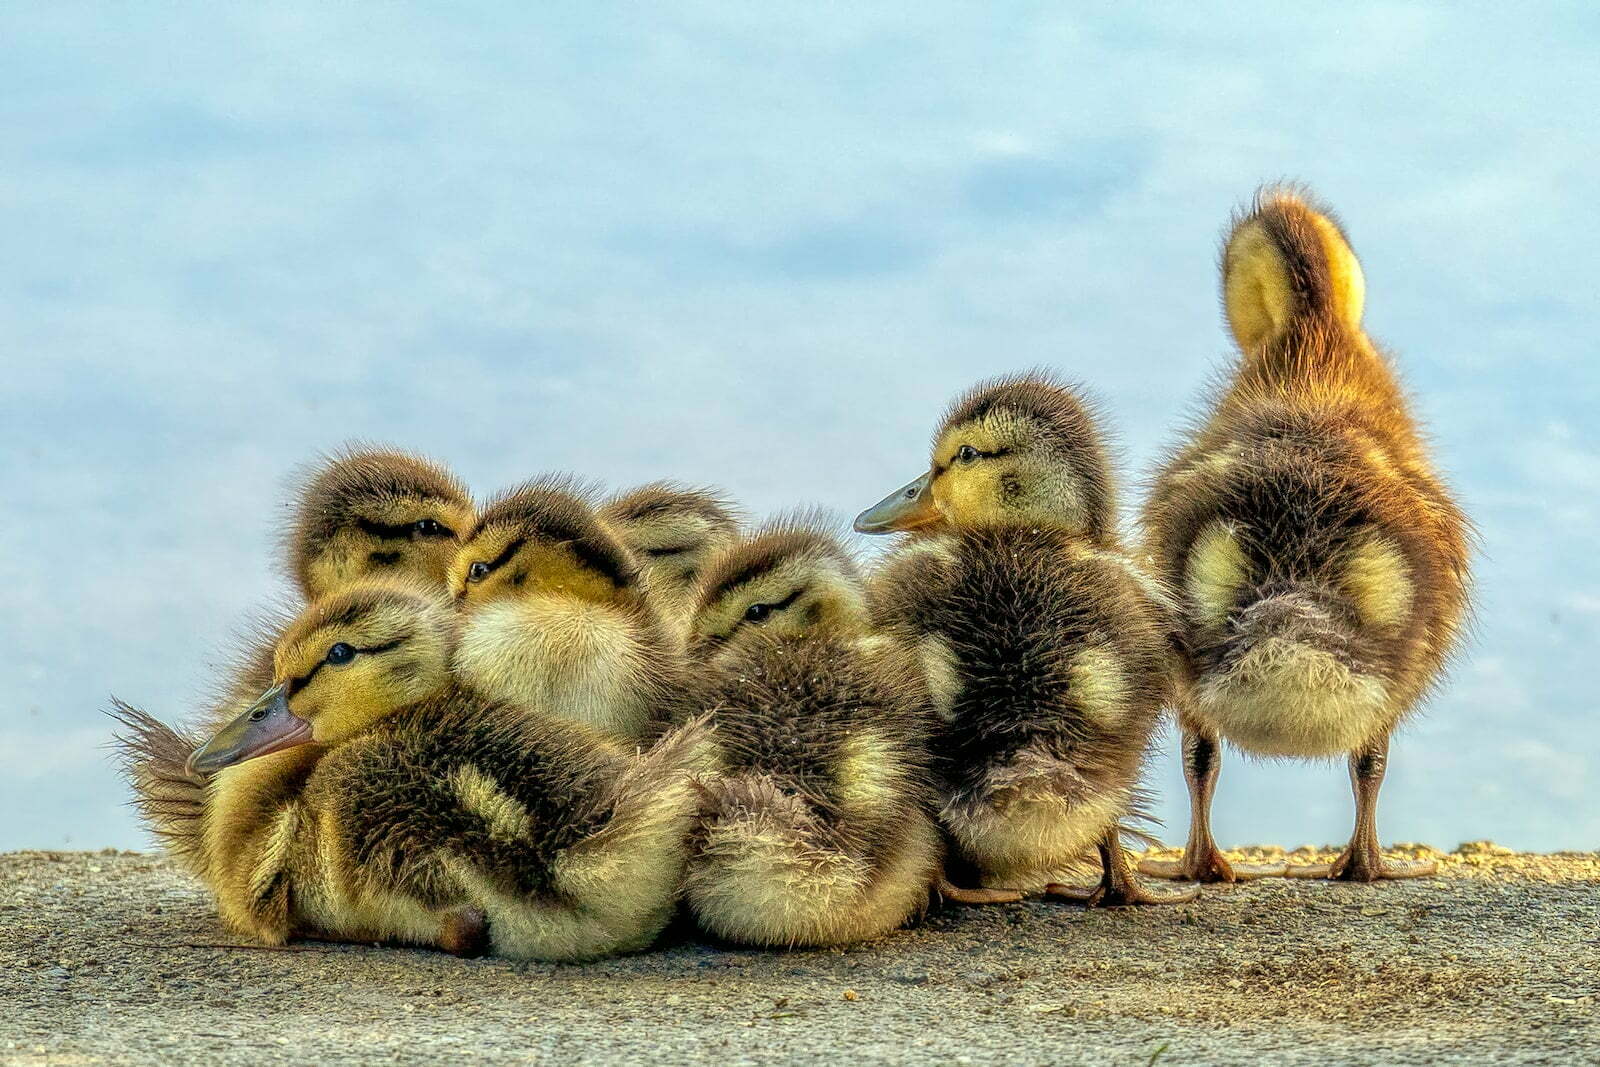 black and yellow ducklings